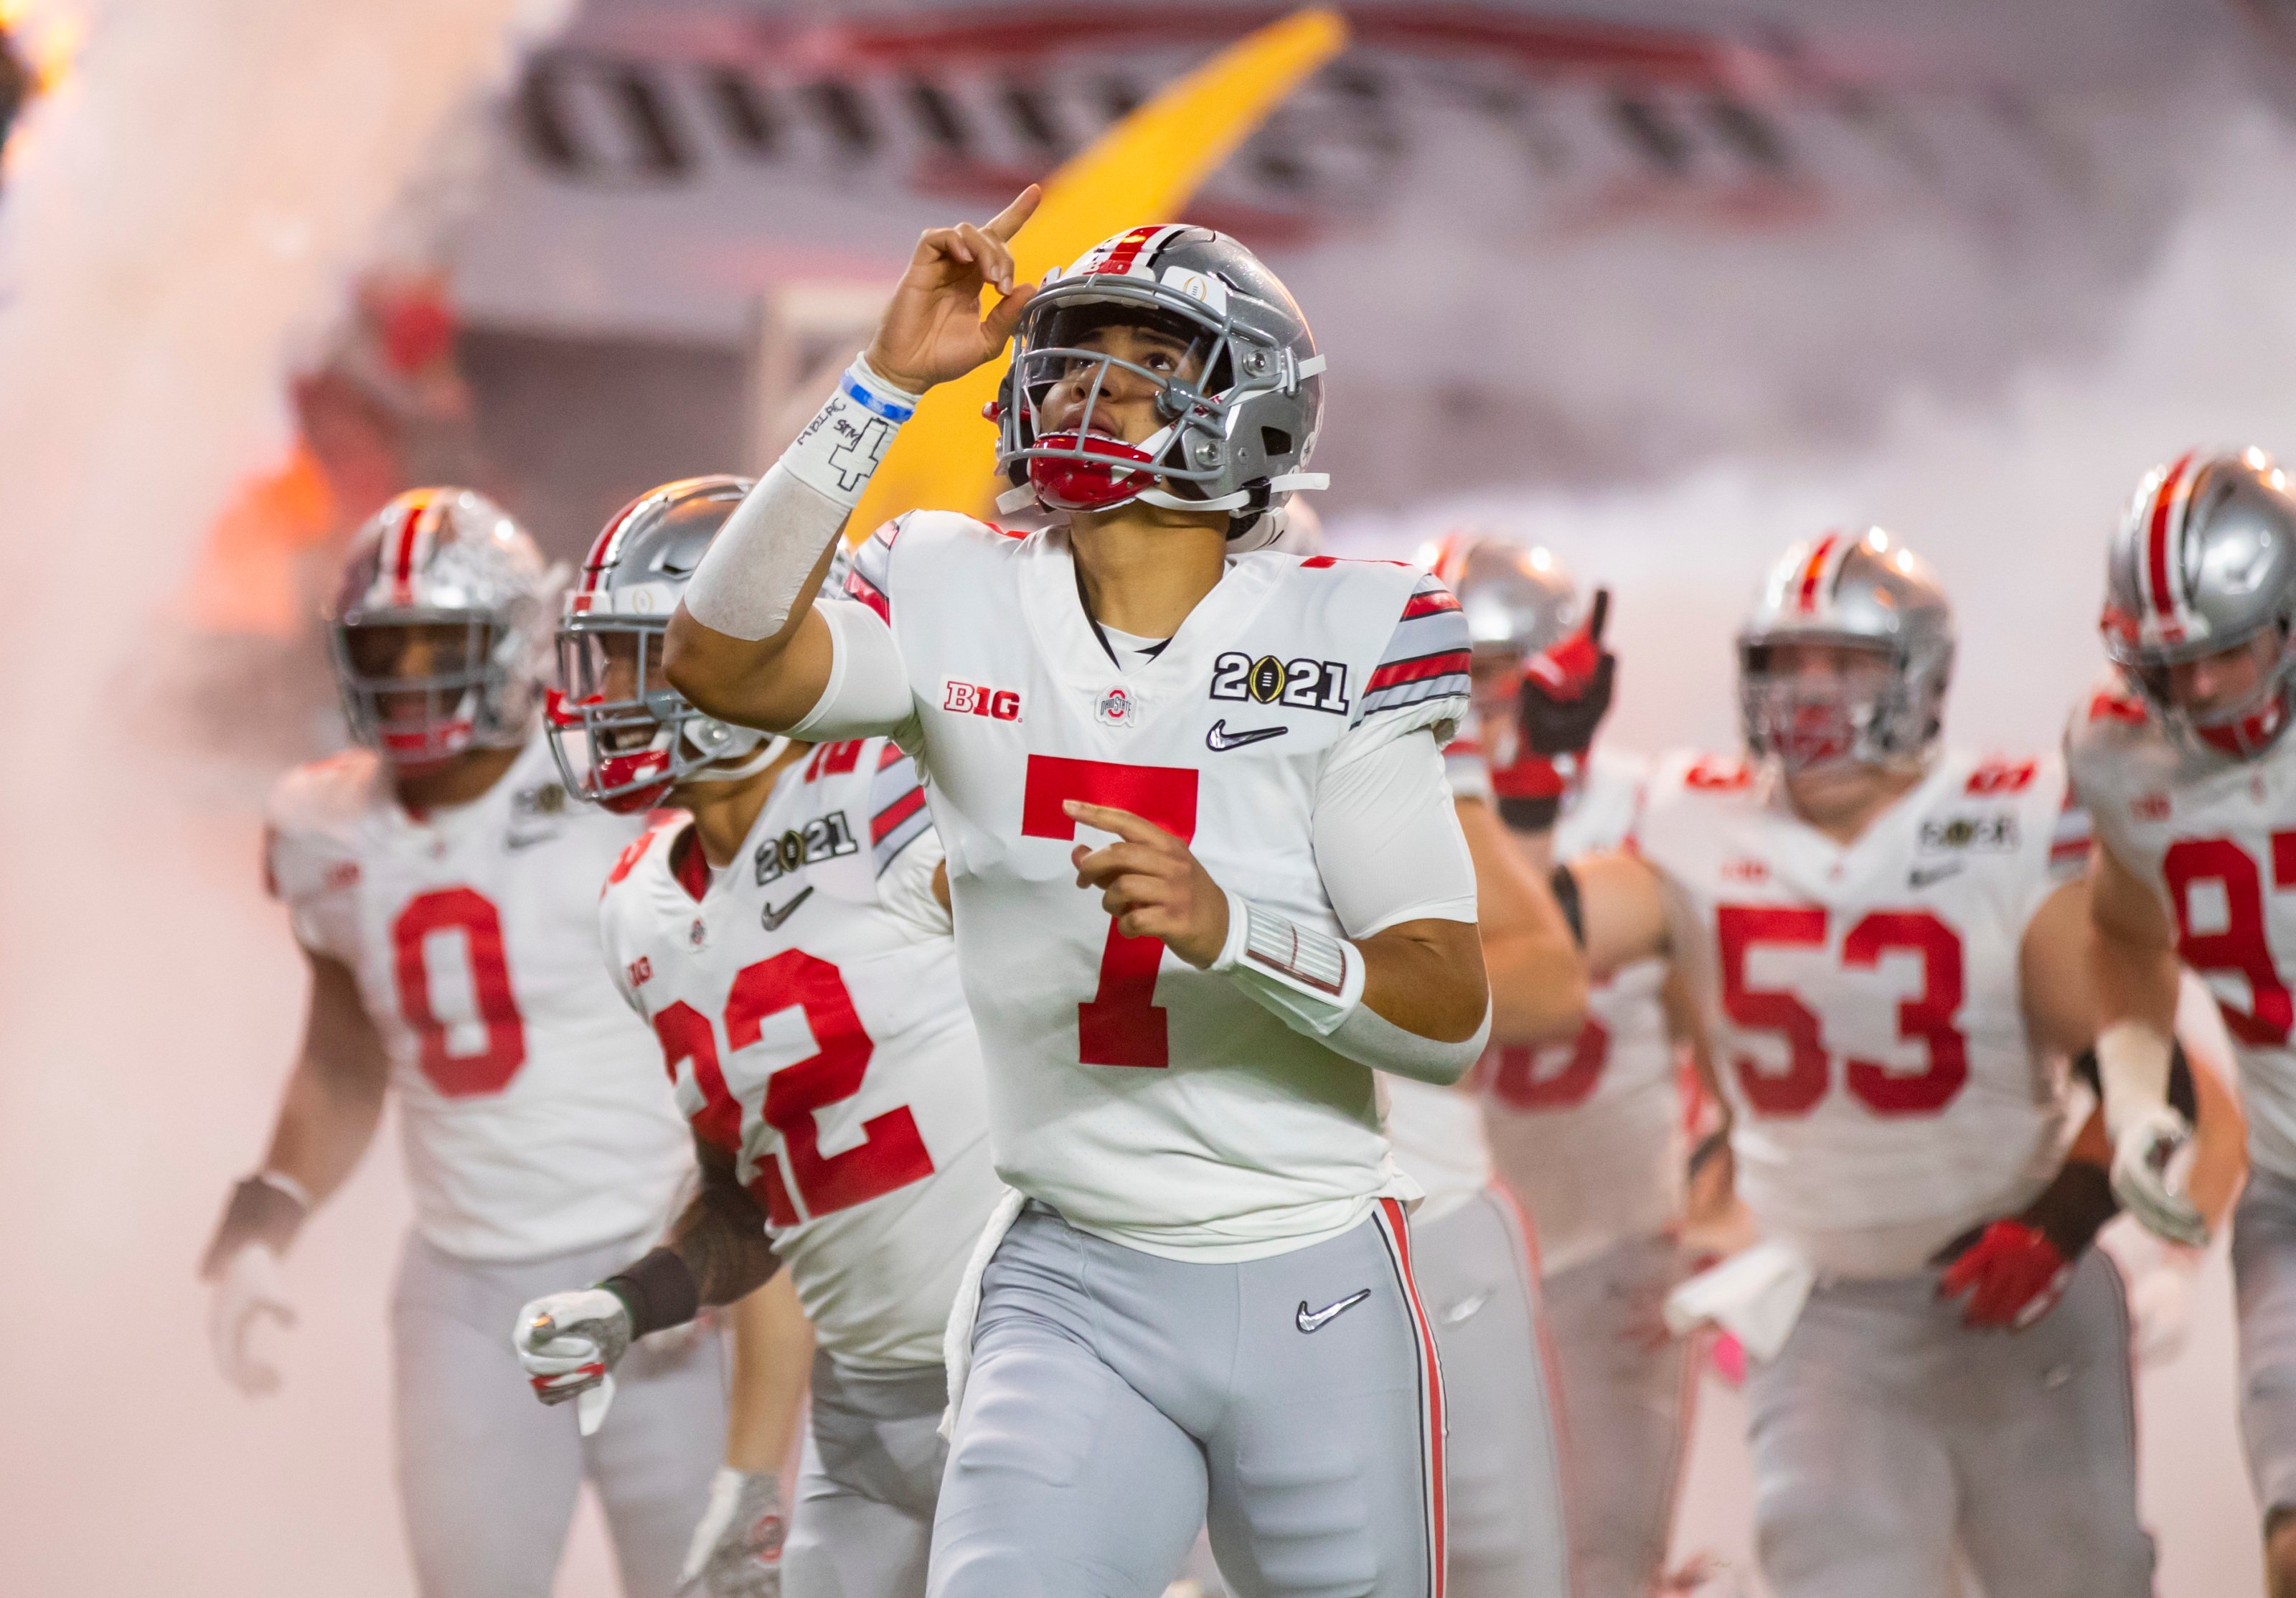 Ohio State Football: CJ Stroud or Jack Miller for QB1 in 2021?